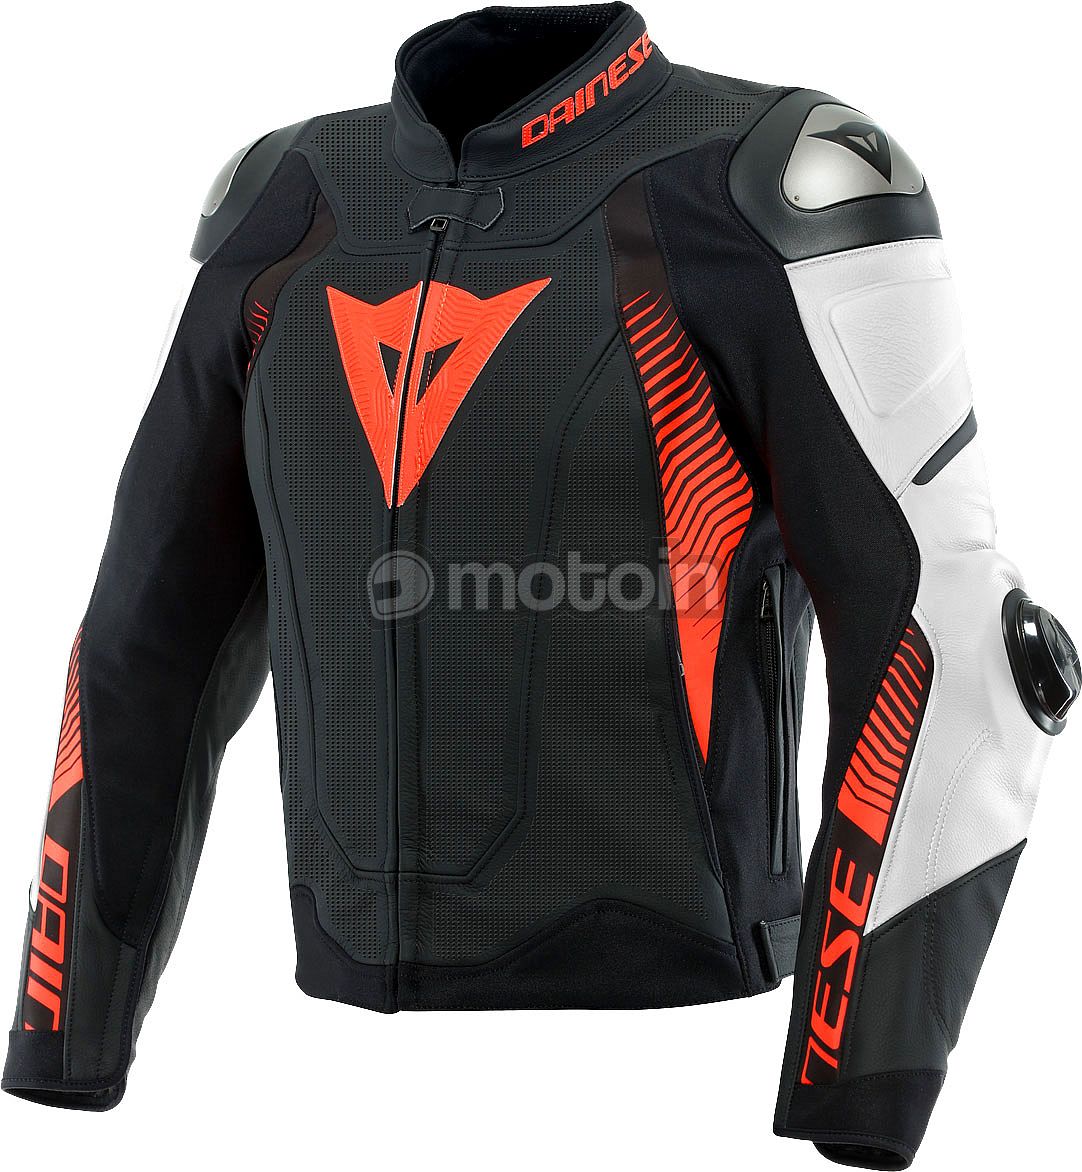 Dainese Super Speed 4, leather jacket perforated - motoin.de